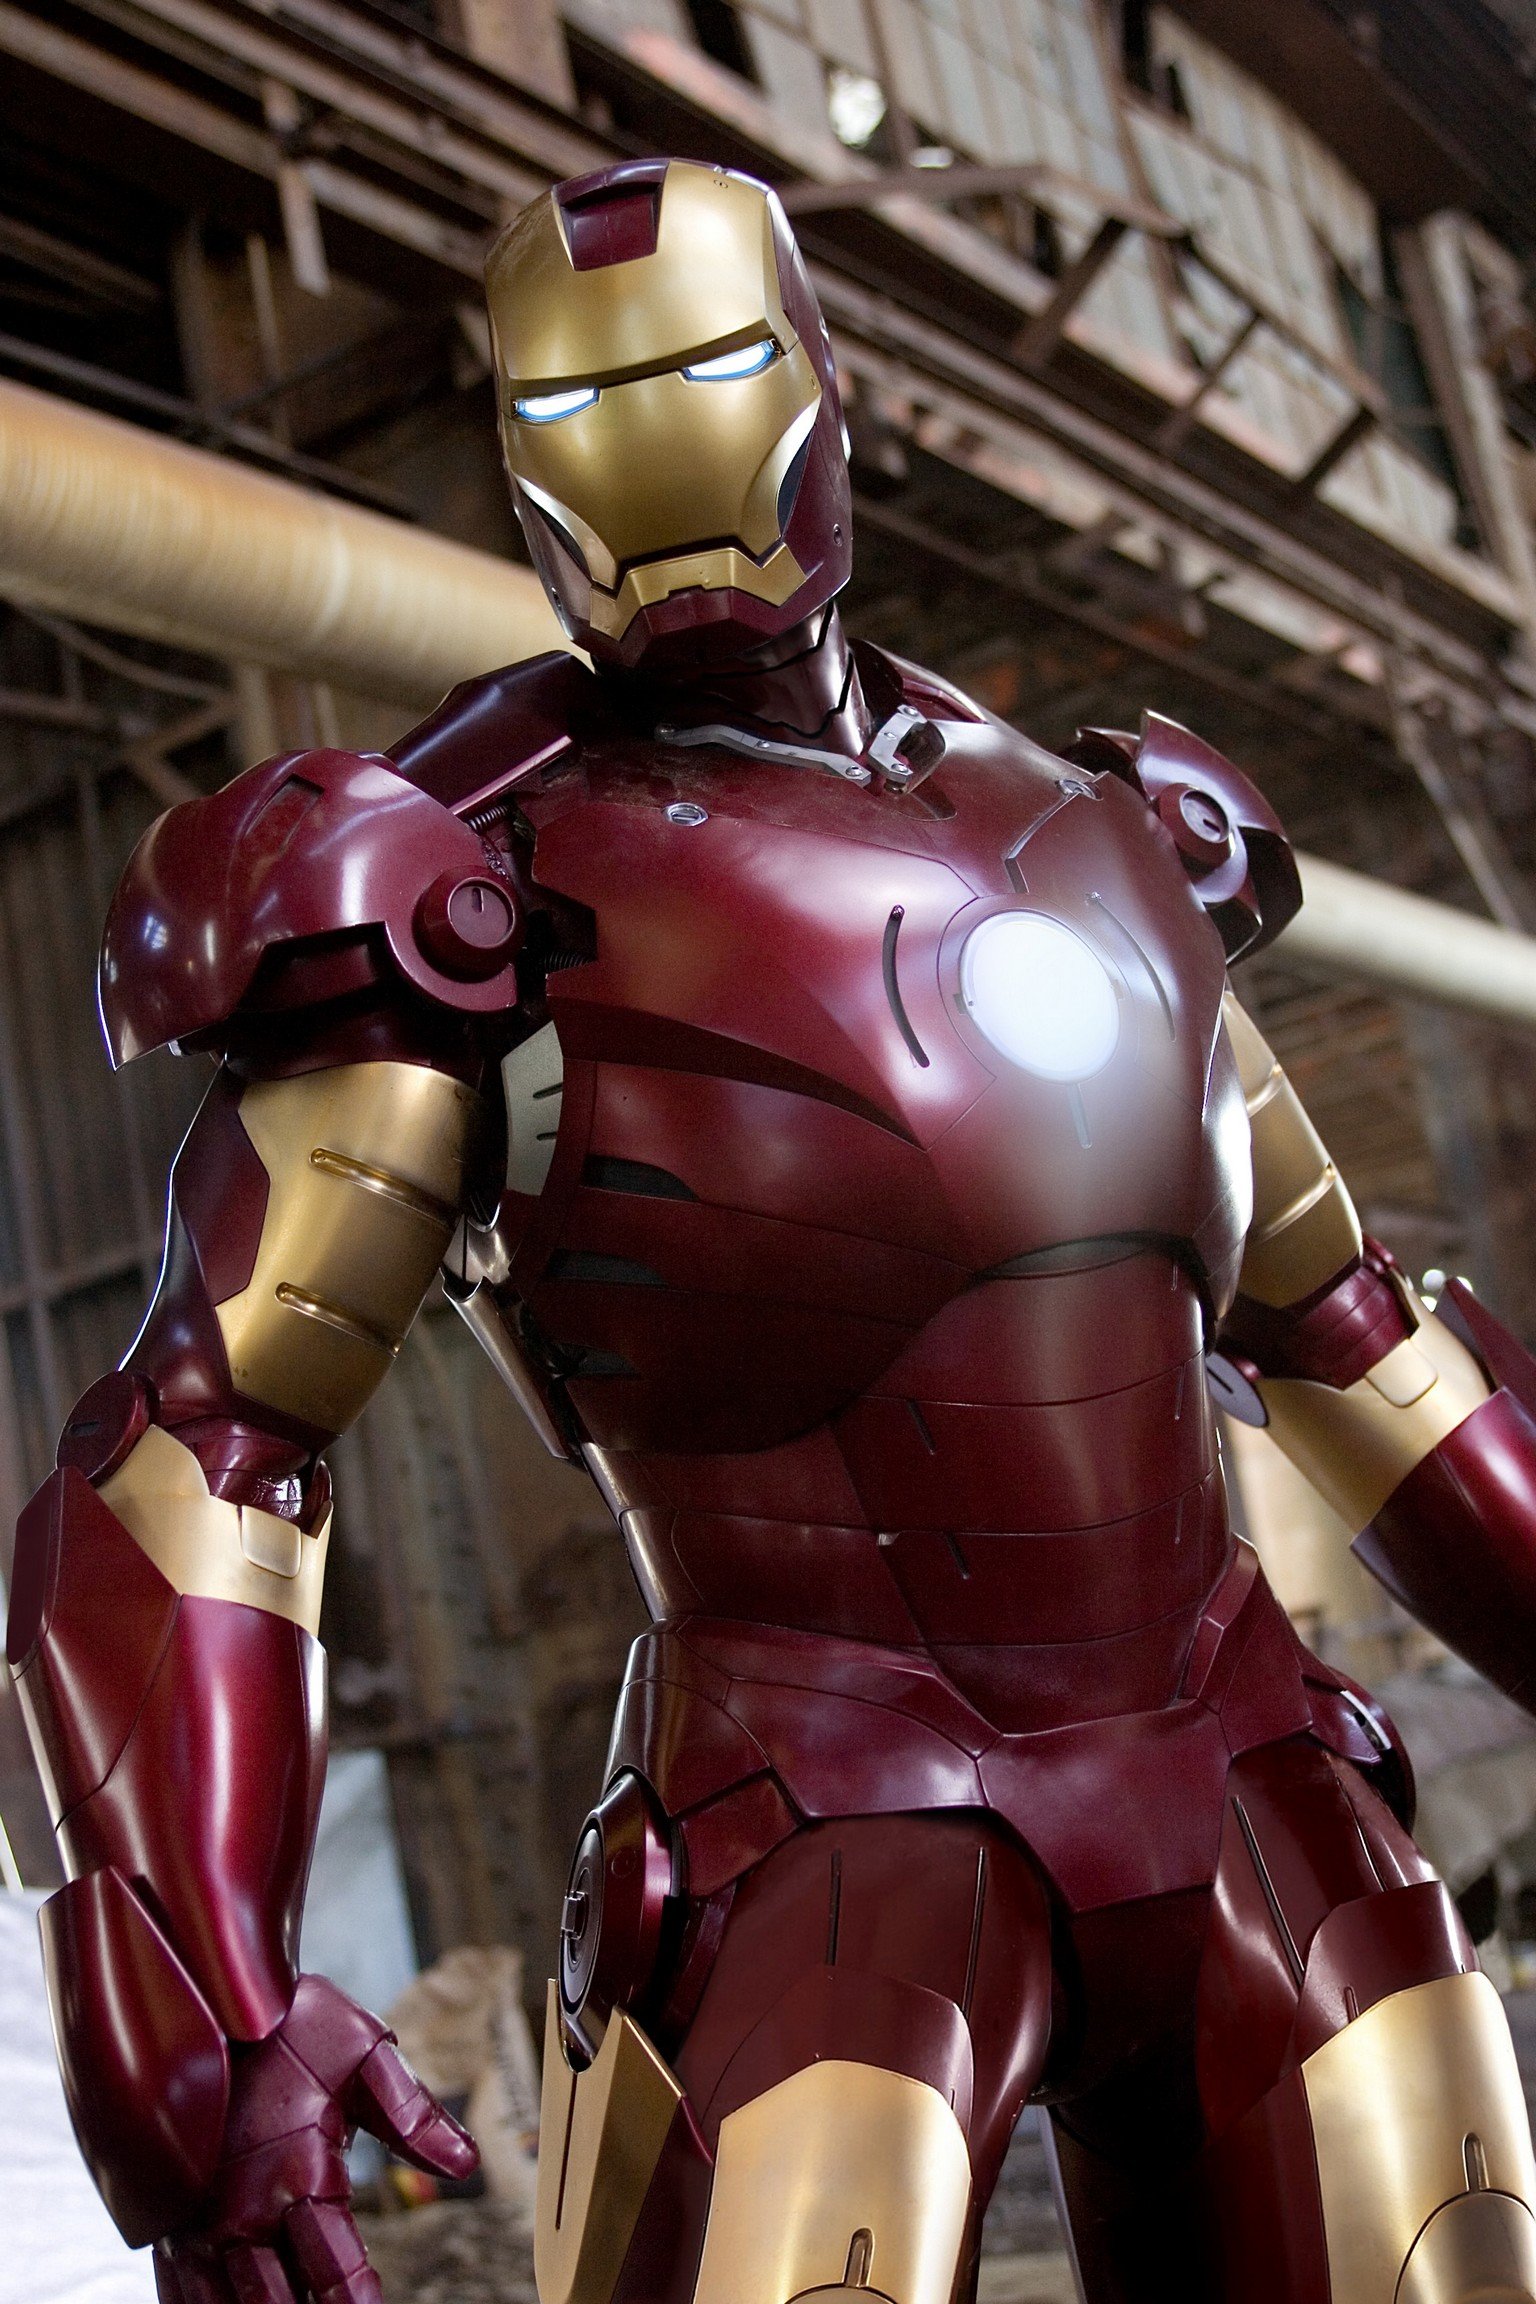 an-iron-man-suit-worth-2-6-crore-was-just-stolen-from-a-storage